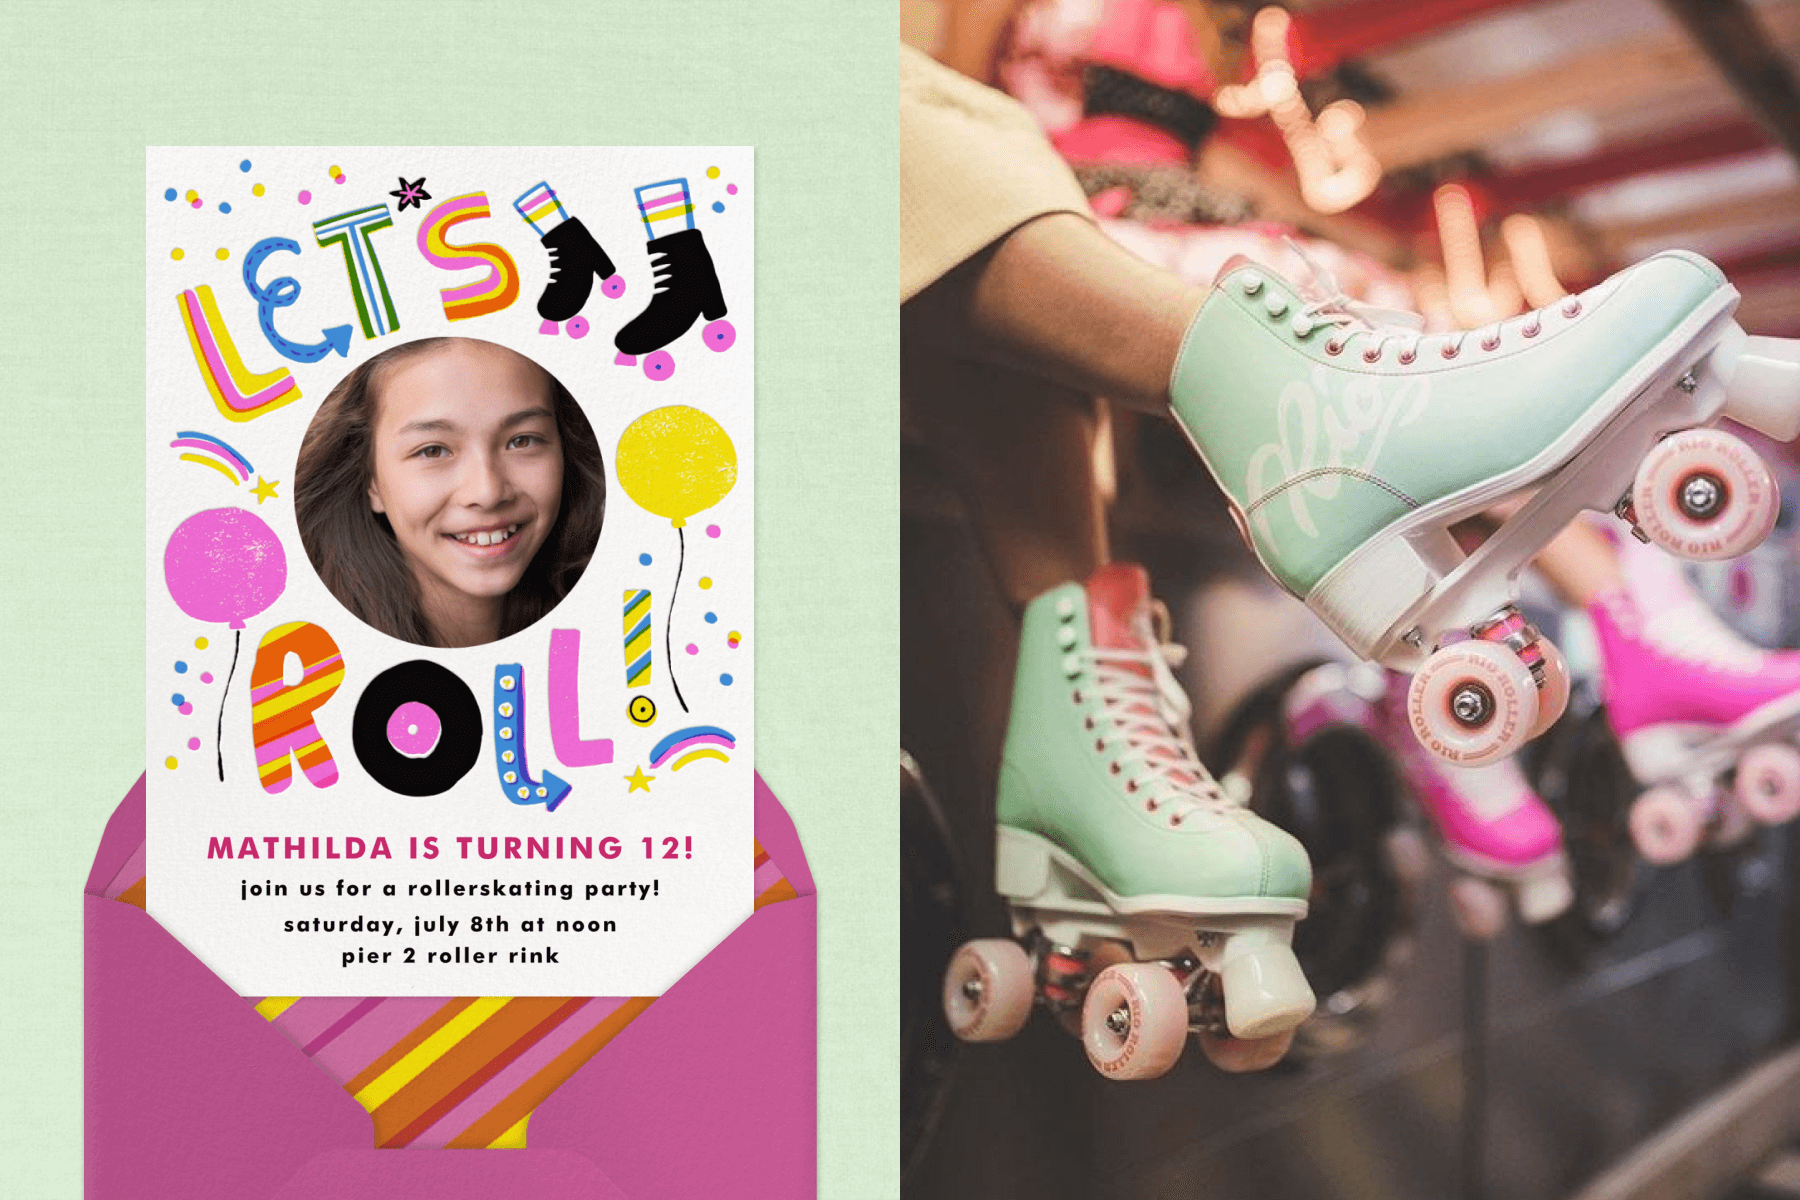 An invitation with a round photo of a girl and the words ‘Let’s Roll’ in colorful organic lettering with roller skates; a person wears mint green roller skates.